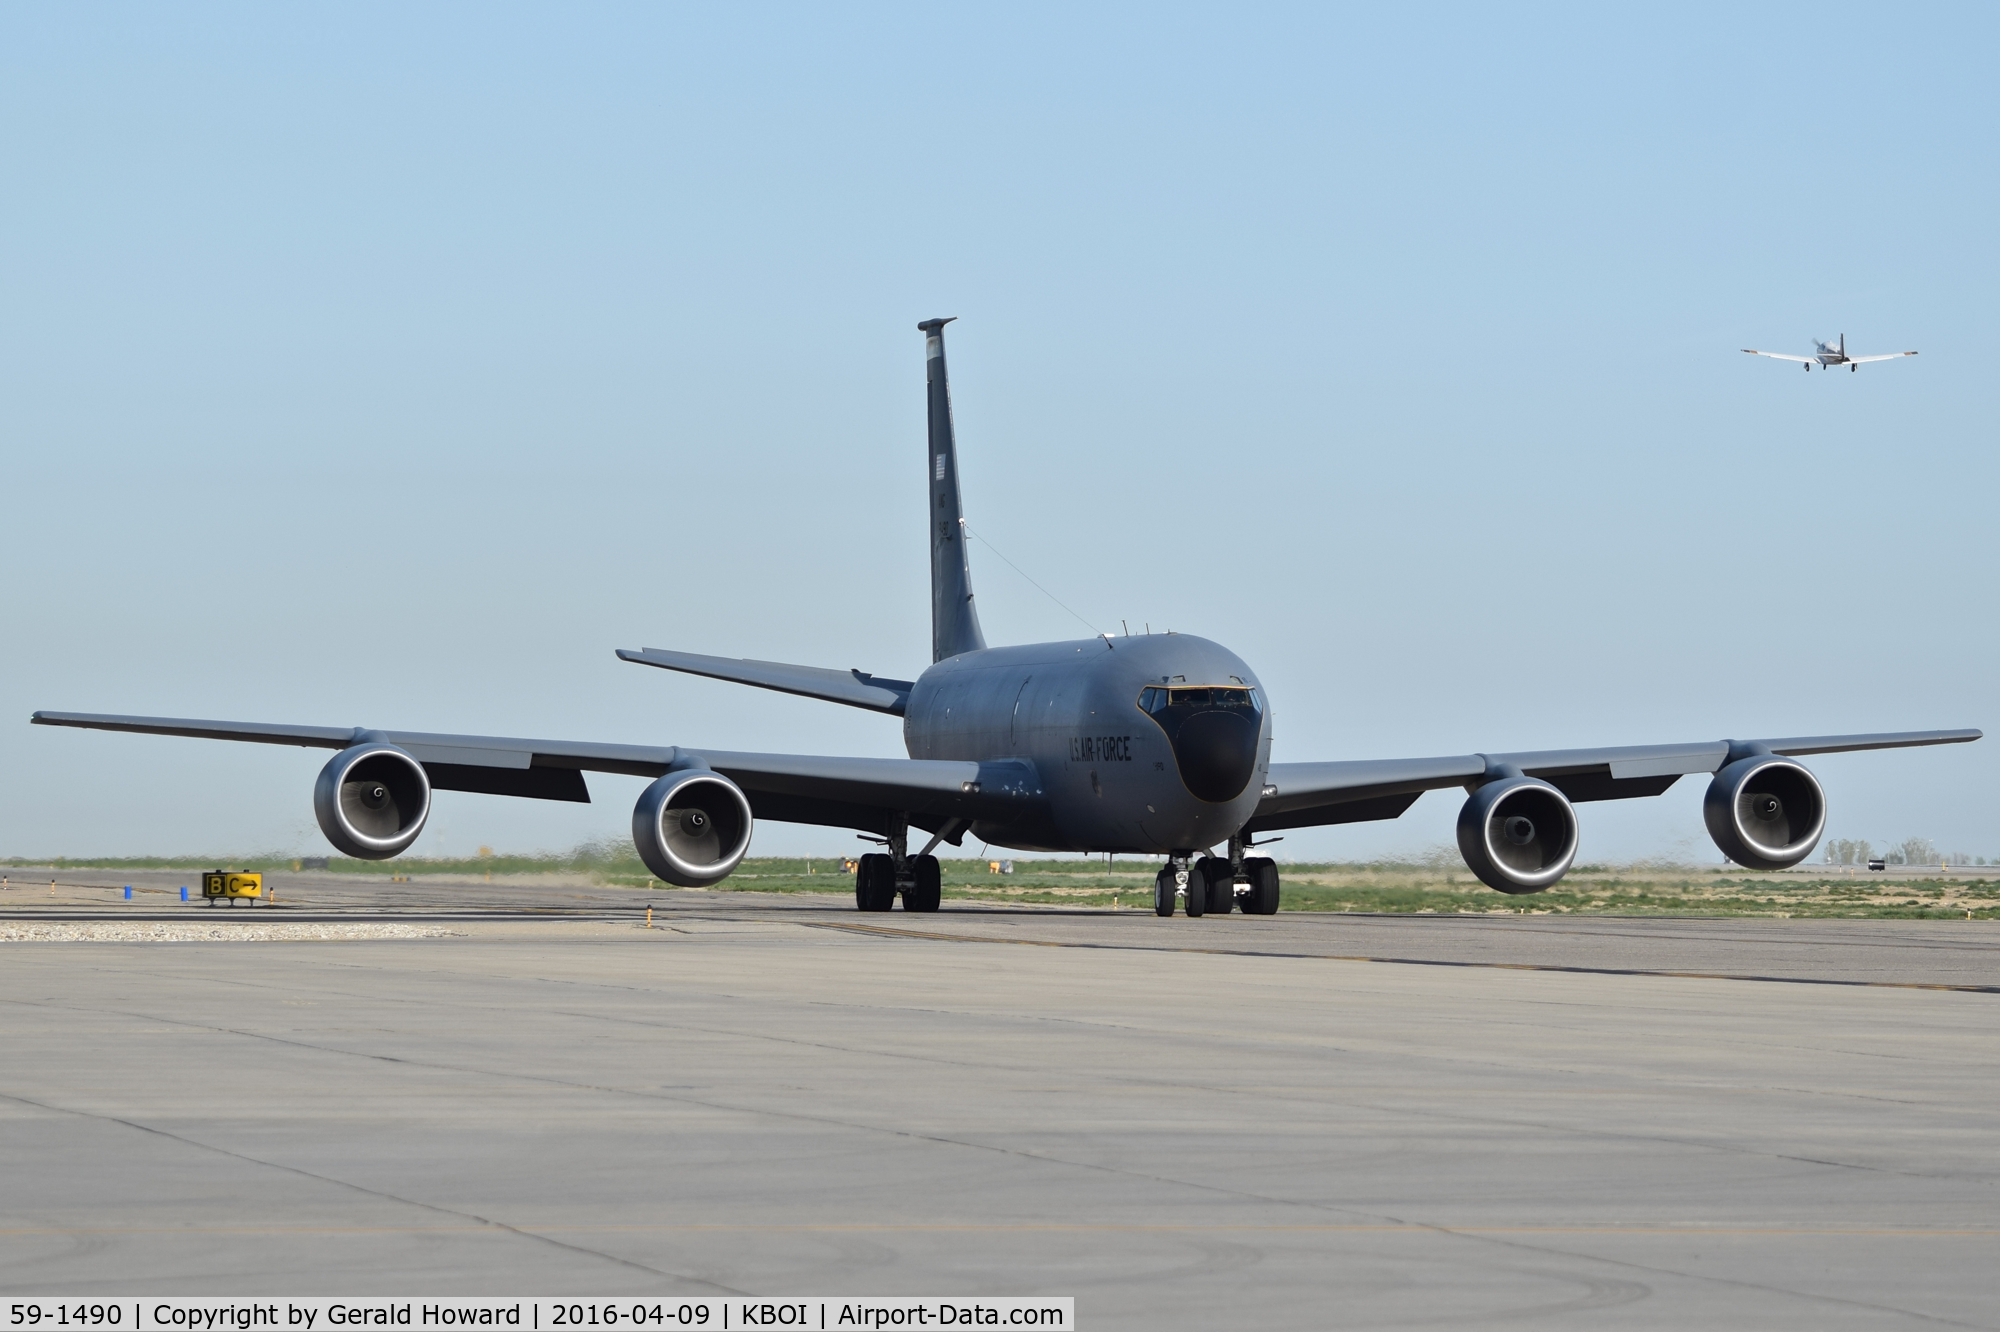 59-1490, 1959 Boeing KC-135T Stratotanker C/N 17978, 171st ARW, Pennsylvania ANG, Pittsburgh ANG Base. Taxing on Bravo for RWY 28L.